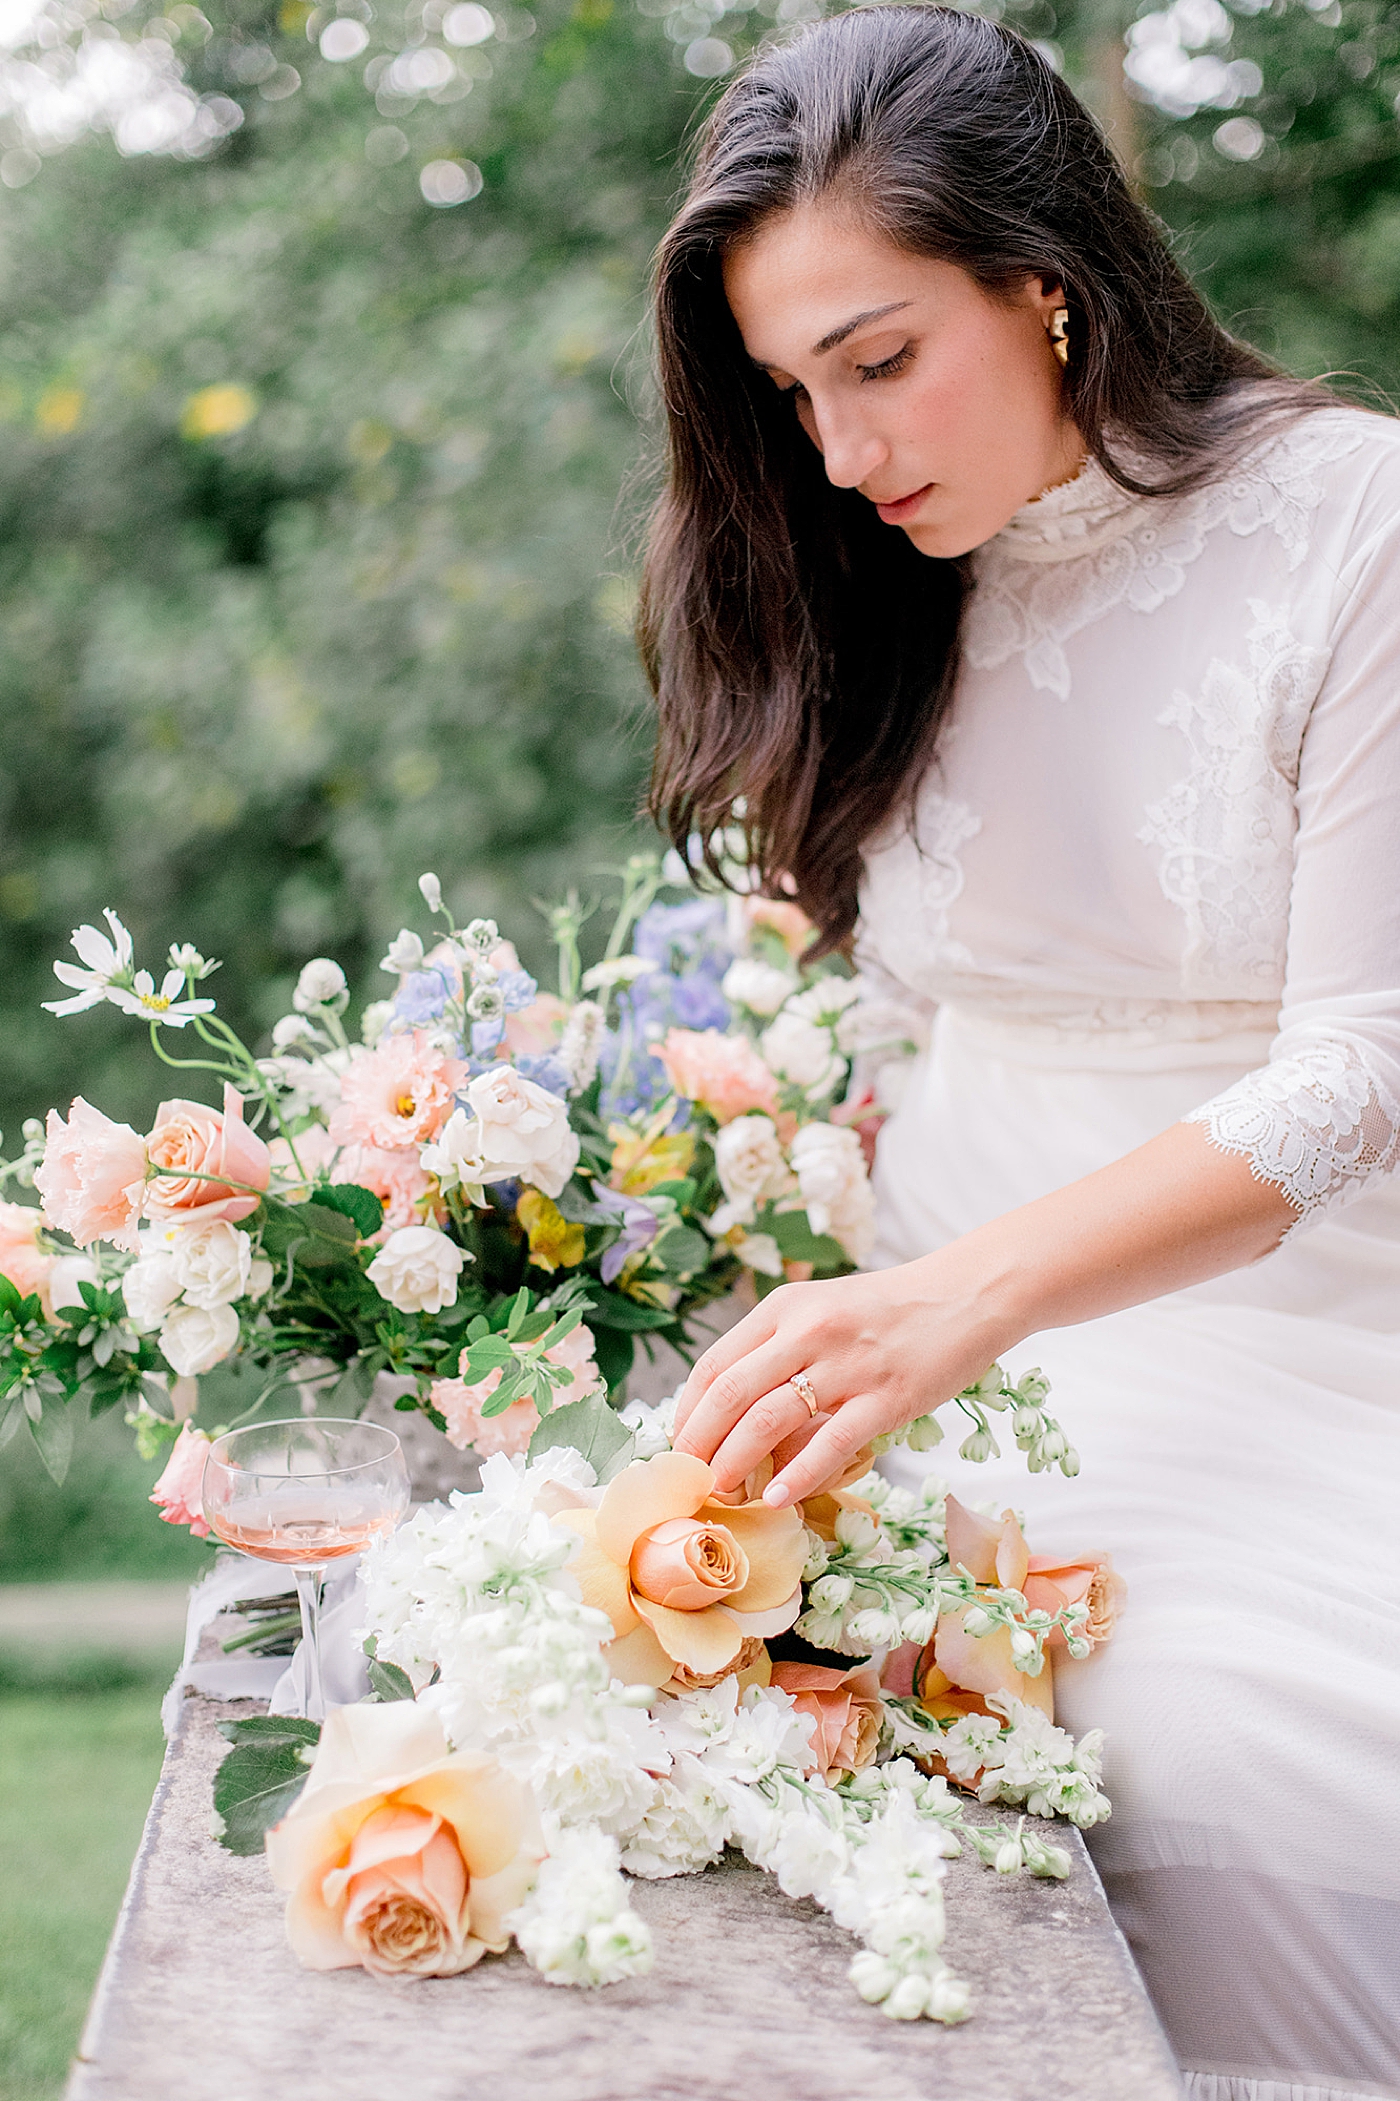 Bride adjusting her wedding flowers | Image by Hope Helmuth Photography